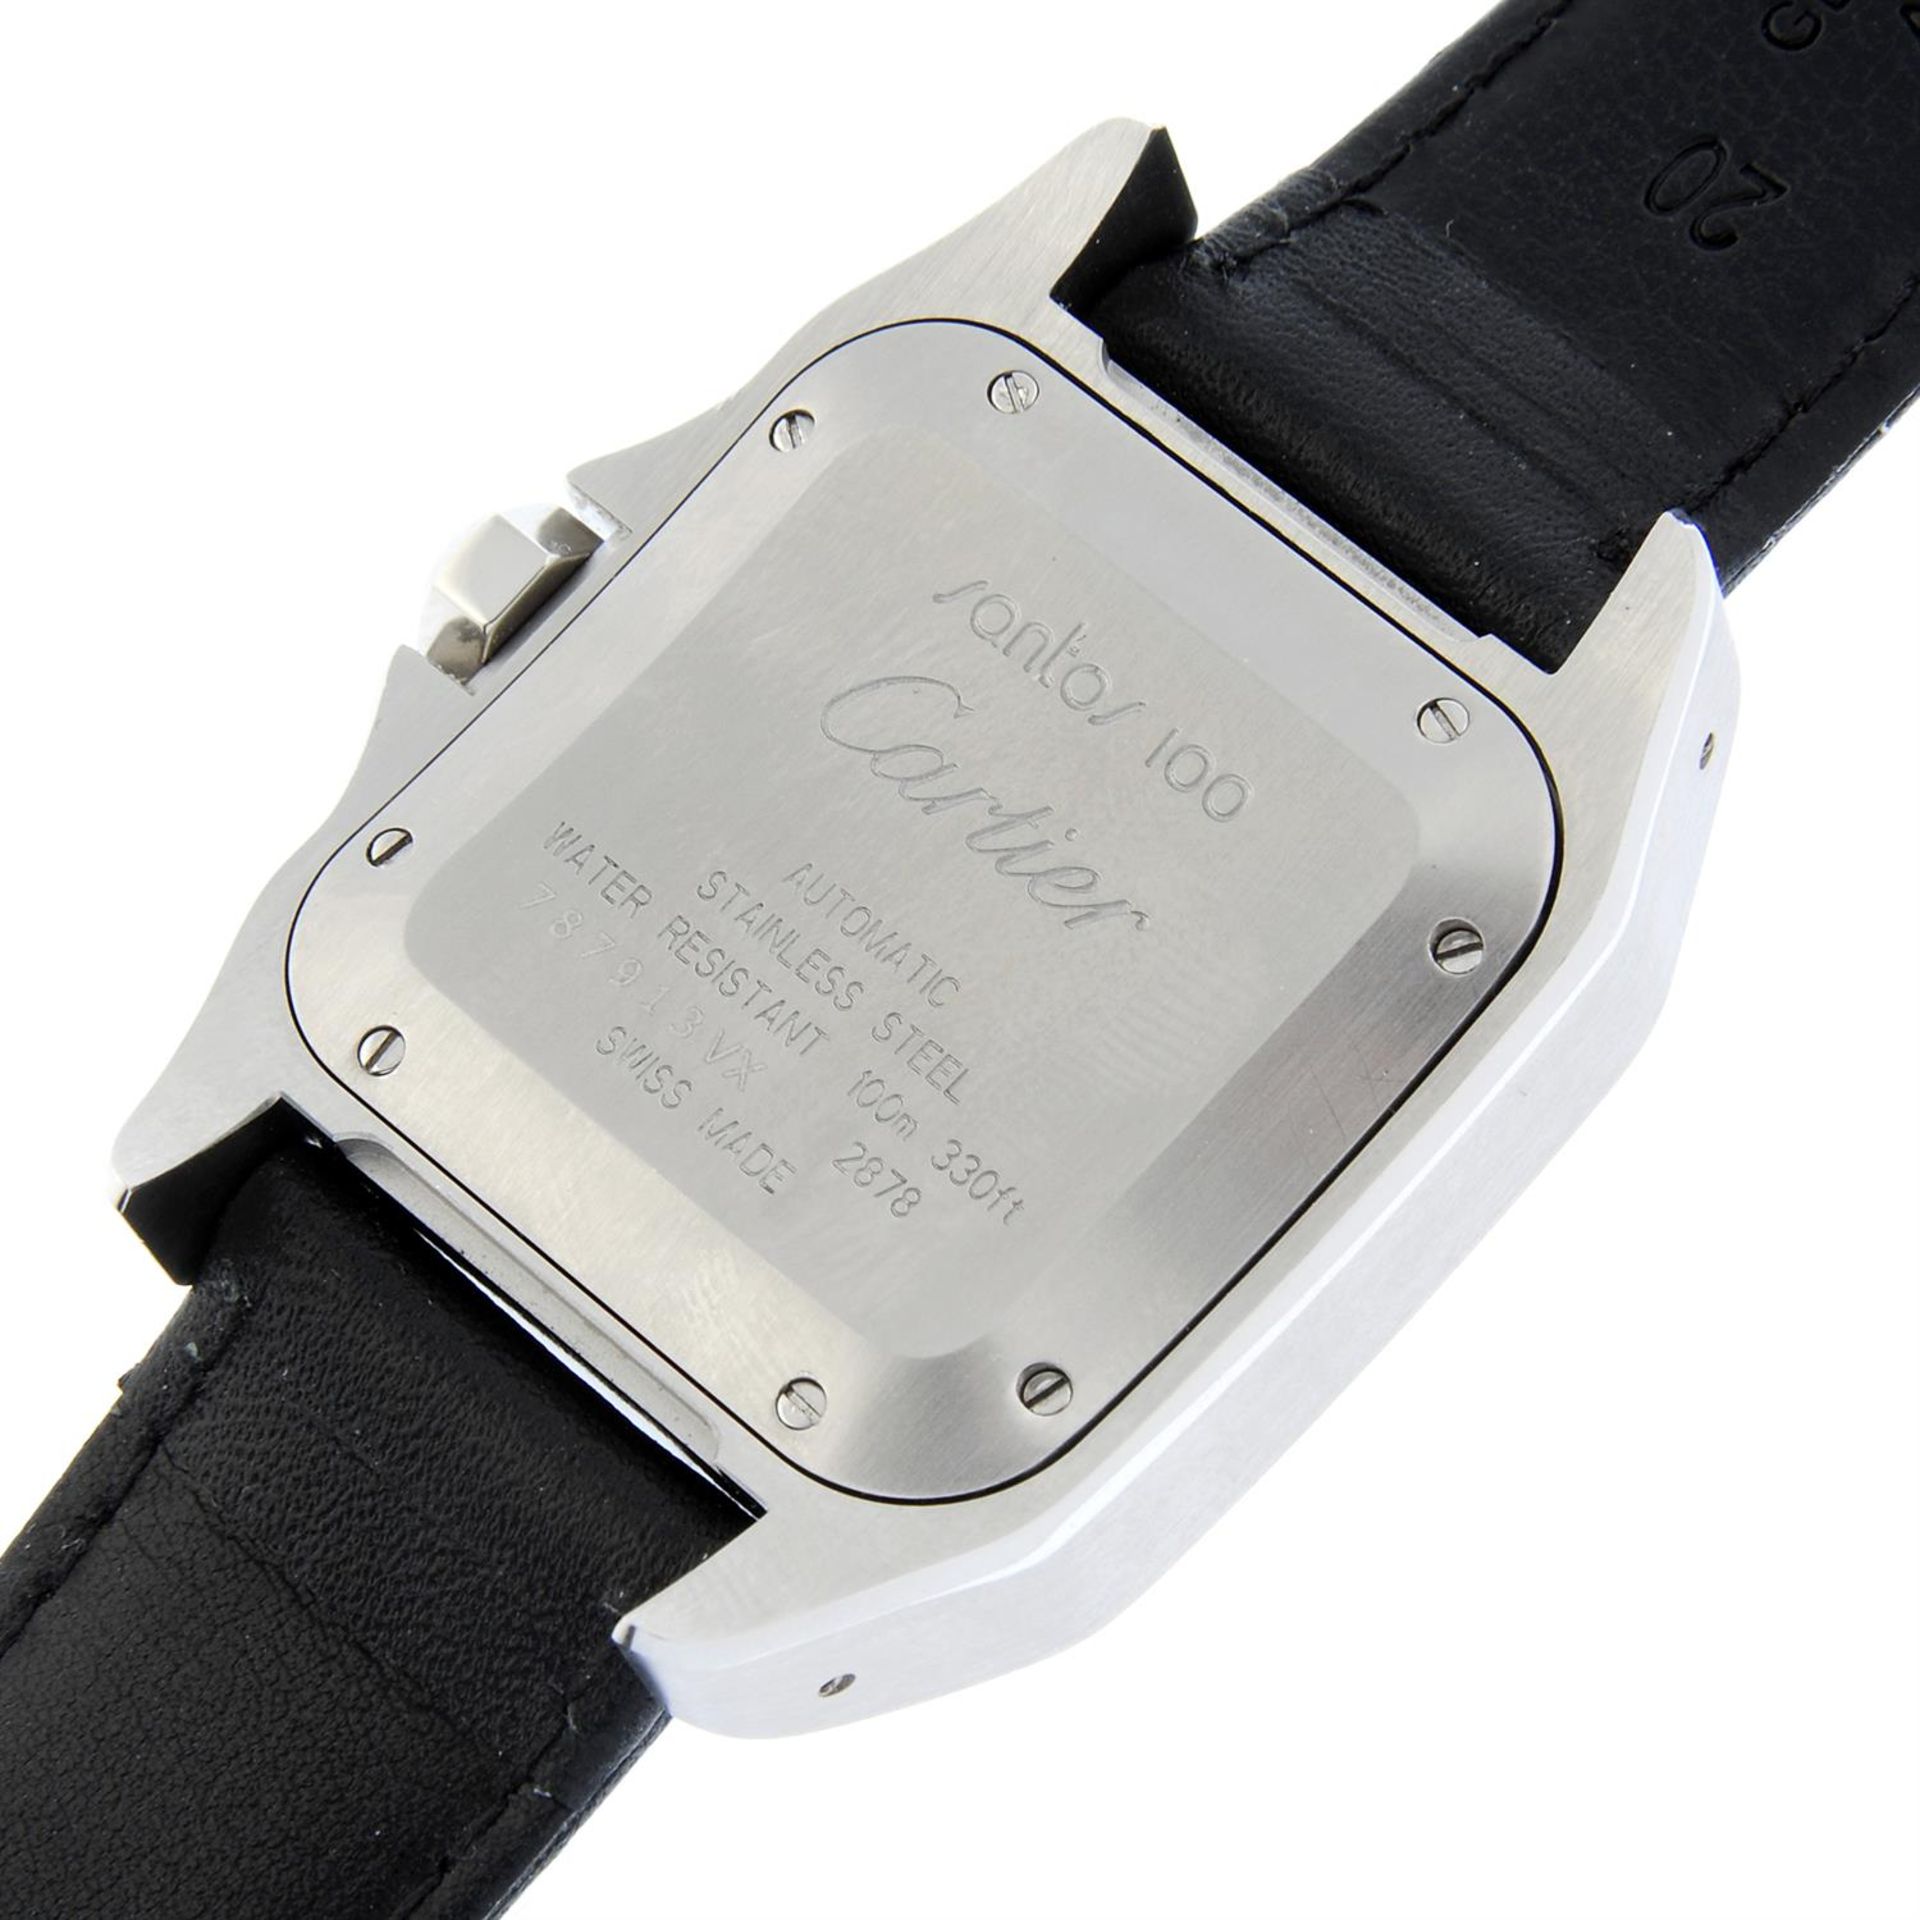 CARTIER - a stainless steel Santos 100 wrist watch, 33x33mm. - Image 4 of 4